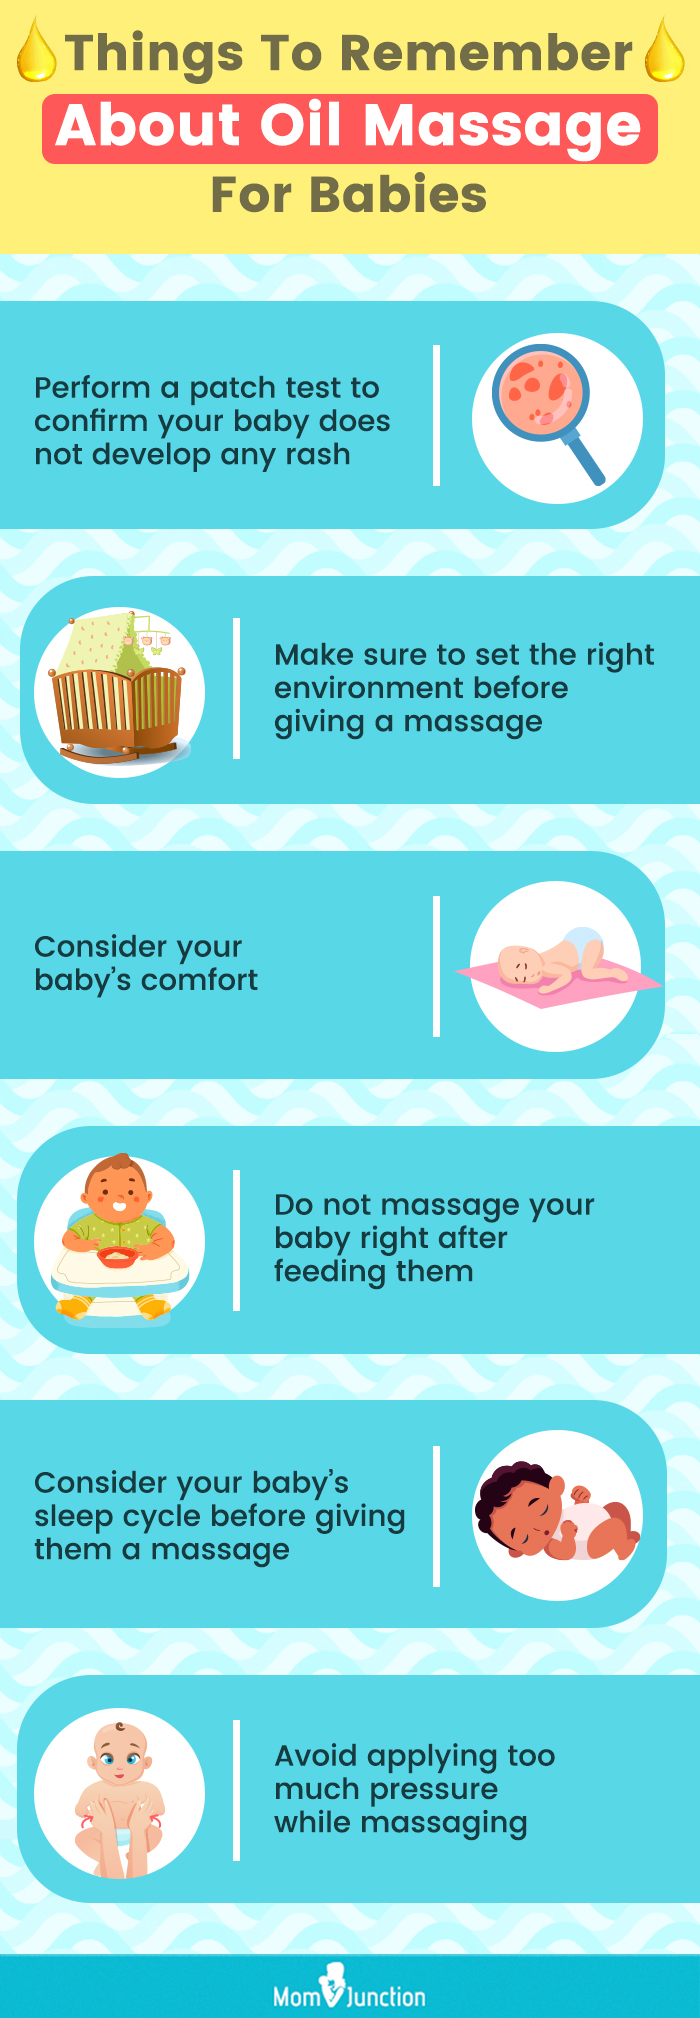 https://www.momjunction.com/wp-content/uploads/2014/05/Infographic-Tips-To-Keep-In-Mind-While-Massaging-Your-Baby.jpg